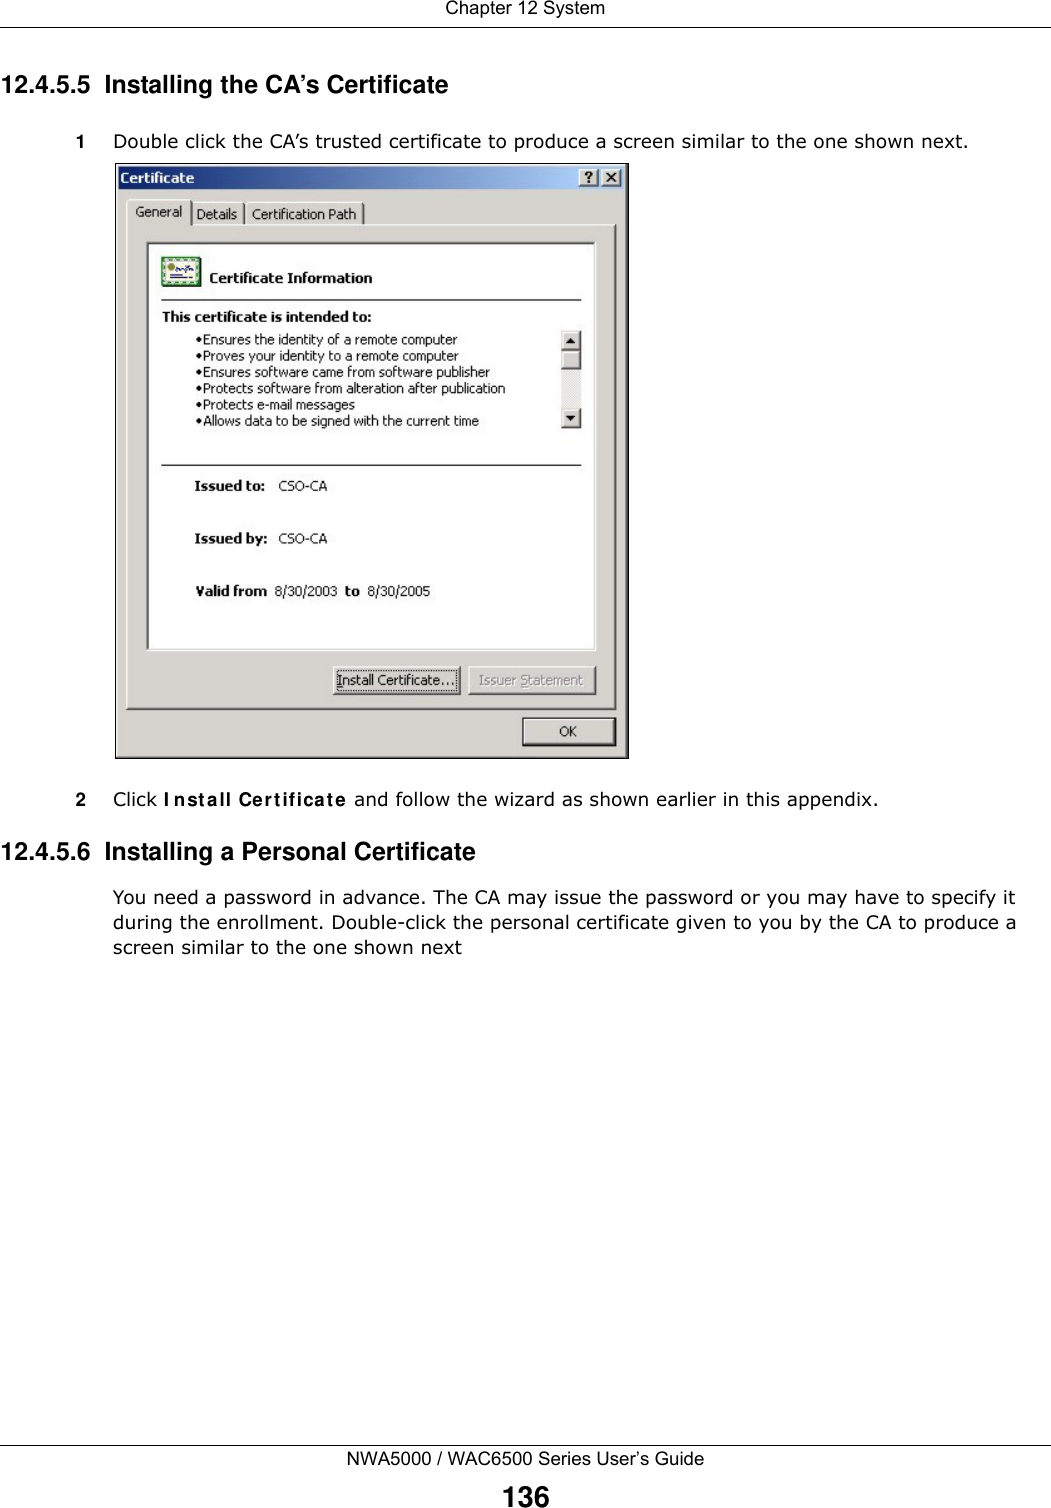 Chapter 12 SystemNWA5000 / WAC6500 Series User’s Guide13612.4.5.5  Installing the CA’s Certificate1Double click the CA’s trusted certificate to produce a screen similar to the one shown next.2Click I nst all Cert ificat e and follow the wizard as shown earlier in this appendix.12.4.5.6  Installing a Personal CertificateYou need a password in advance. The CA may issue the password or you may have to specify it during the enrollment. Double-click the personal certificate given to you by the CA to produce a screen similar to the one shown next